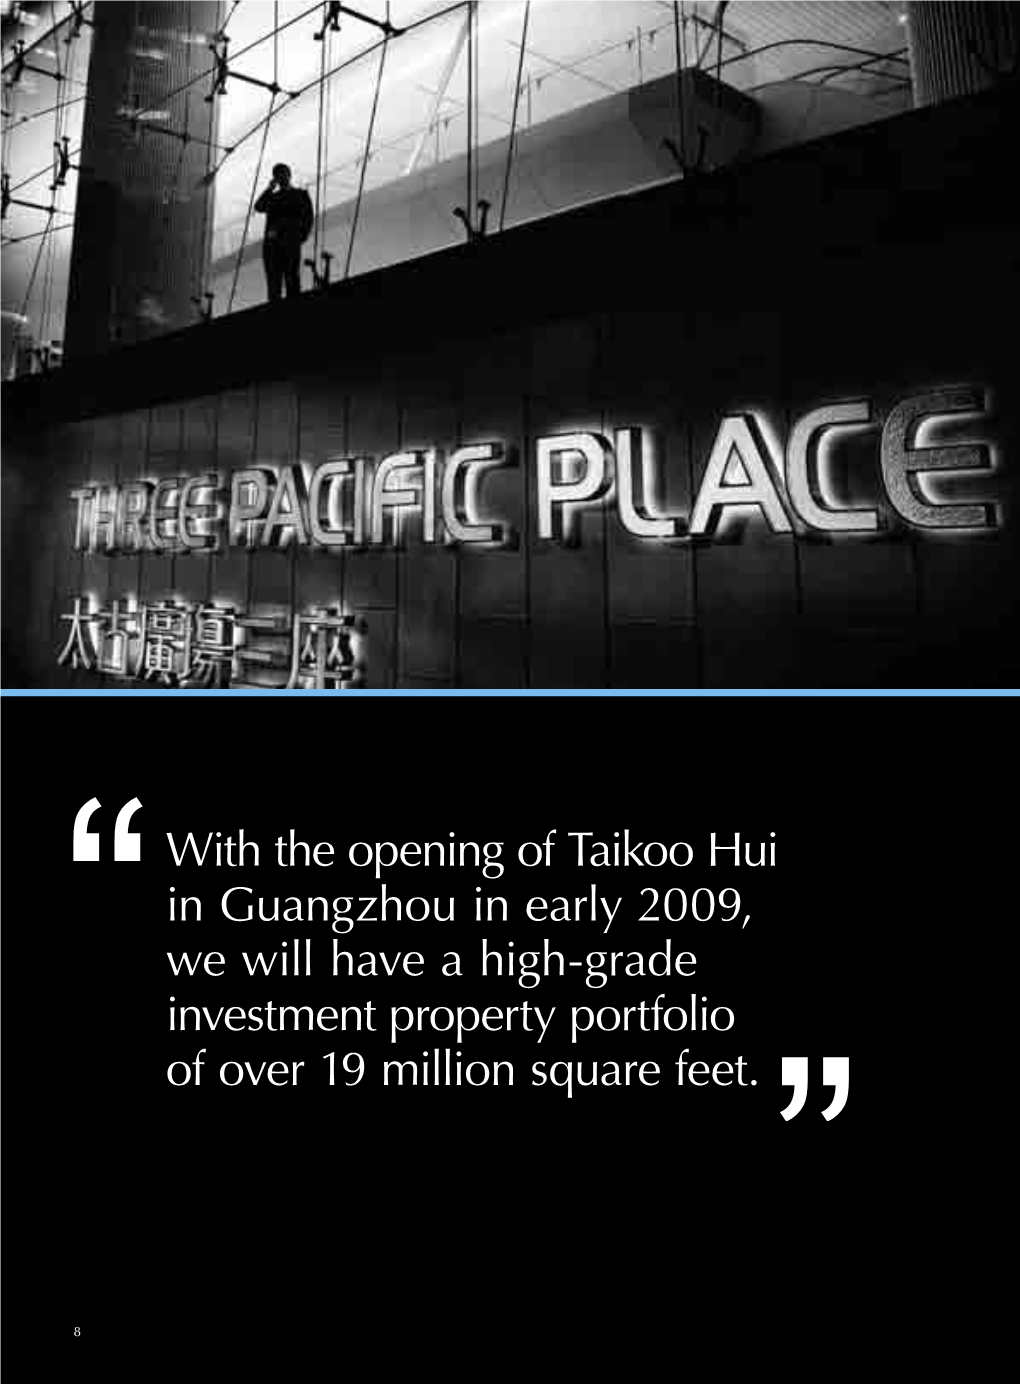 With the Opening of Taikoo Hui in Guangzhou in Early 2009, We Will Have a High-Grade Investment Property Portfolio of Over 19 Million Square Feet